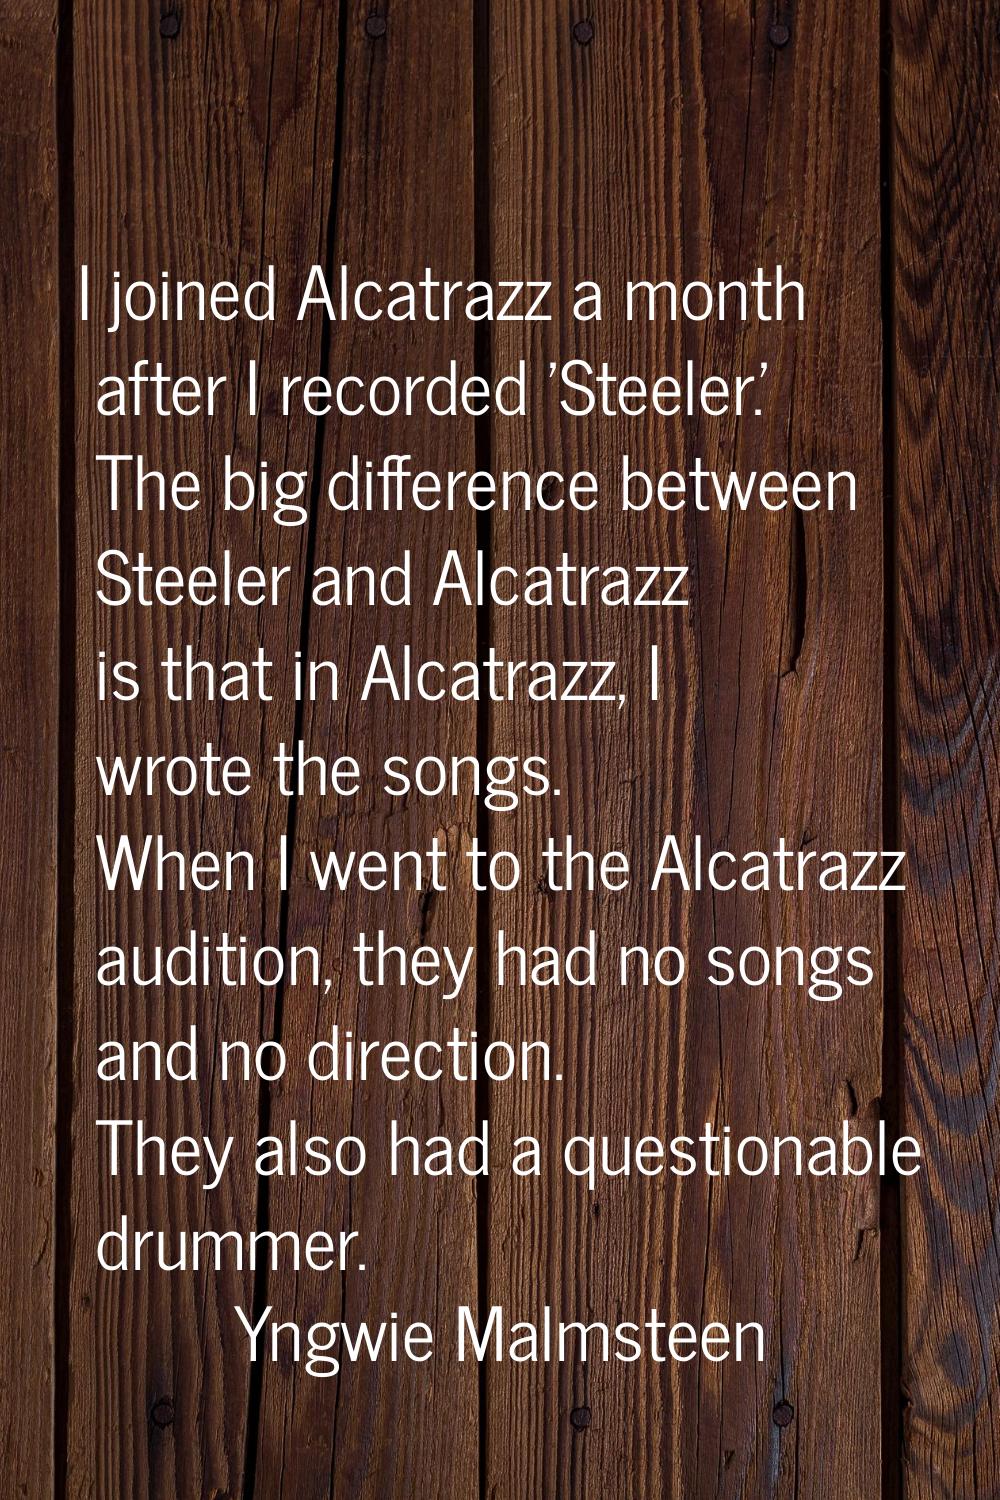 I joined Alcatrazz a month after I recorded 'Steeler.' The big difference between Steeler and Alcat